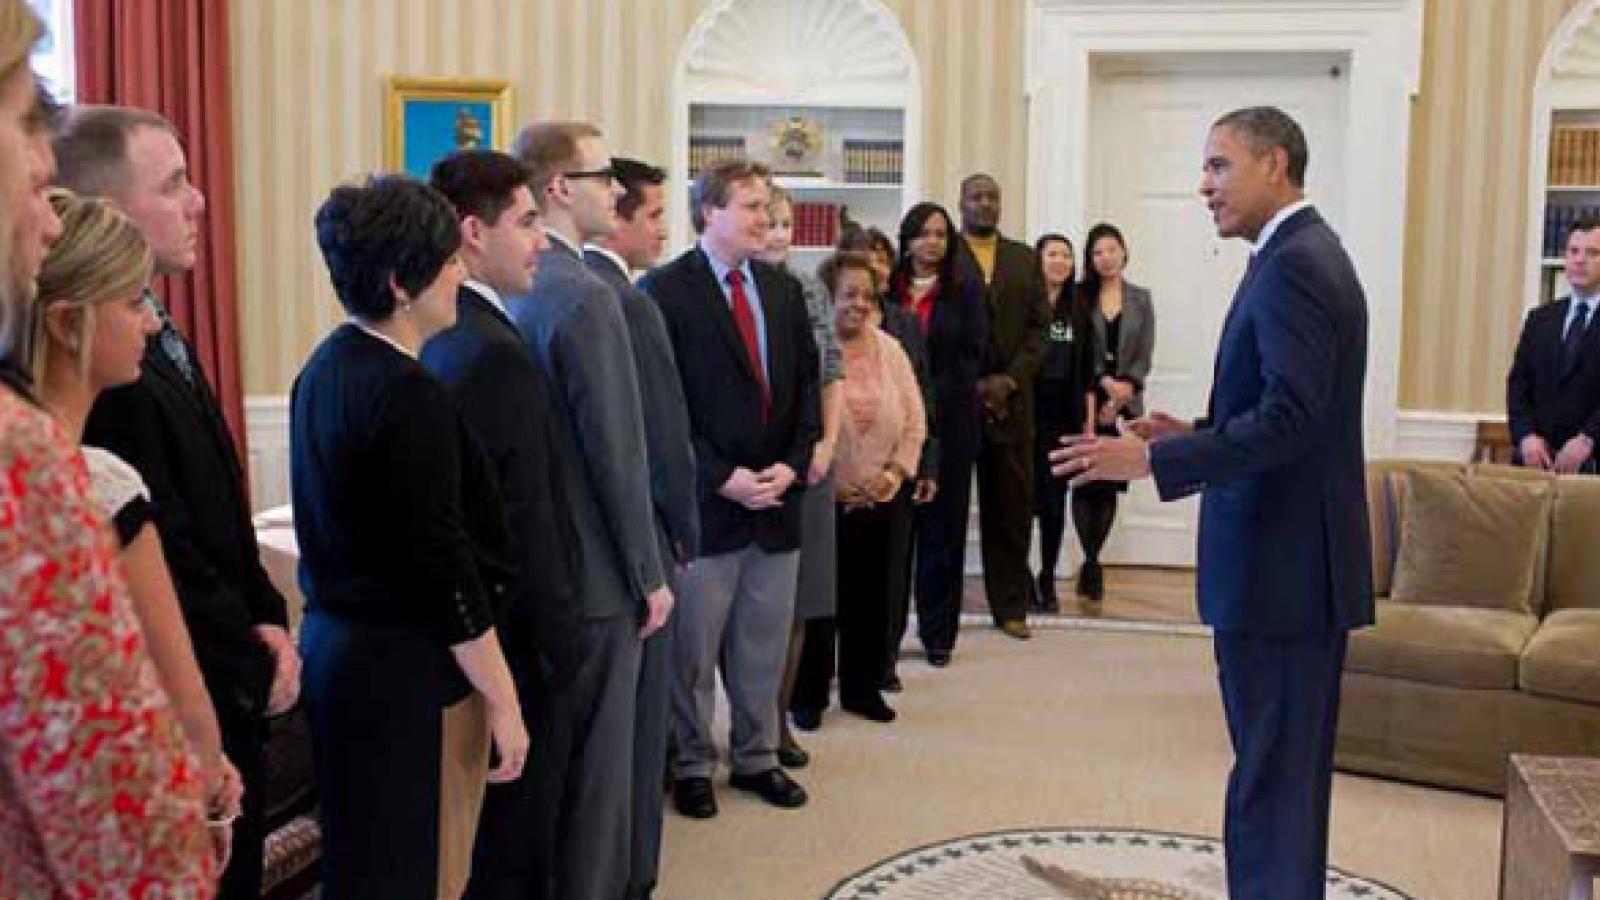 Erica Chain (second from right in line) meeting President Obama as citizen co‐chair of his inauguration.